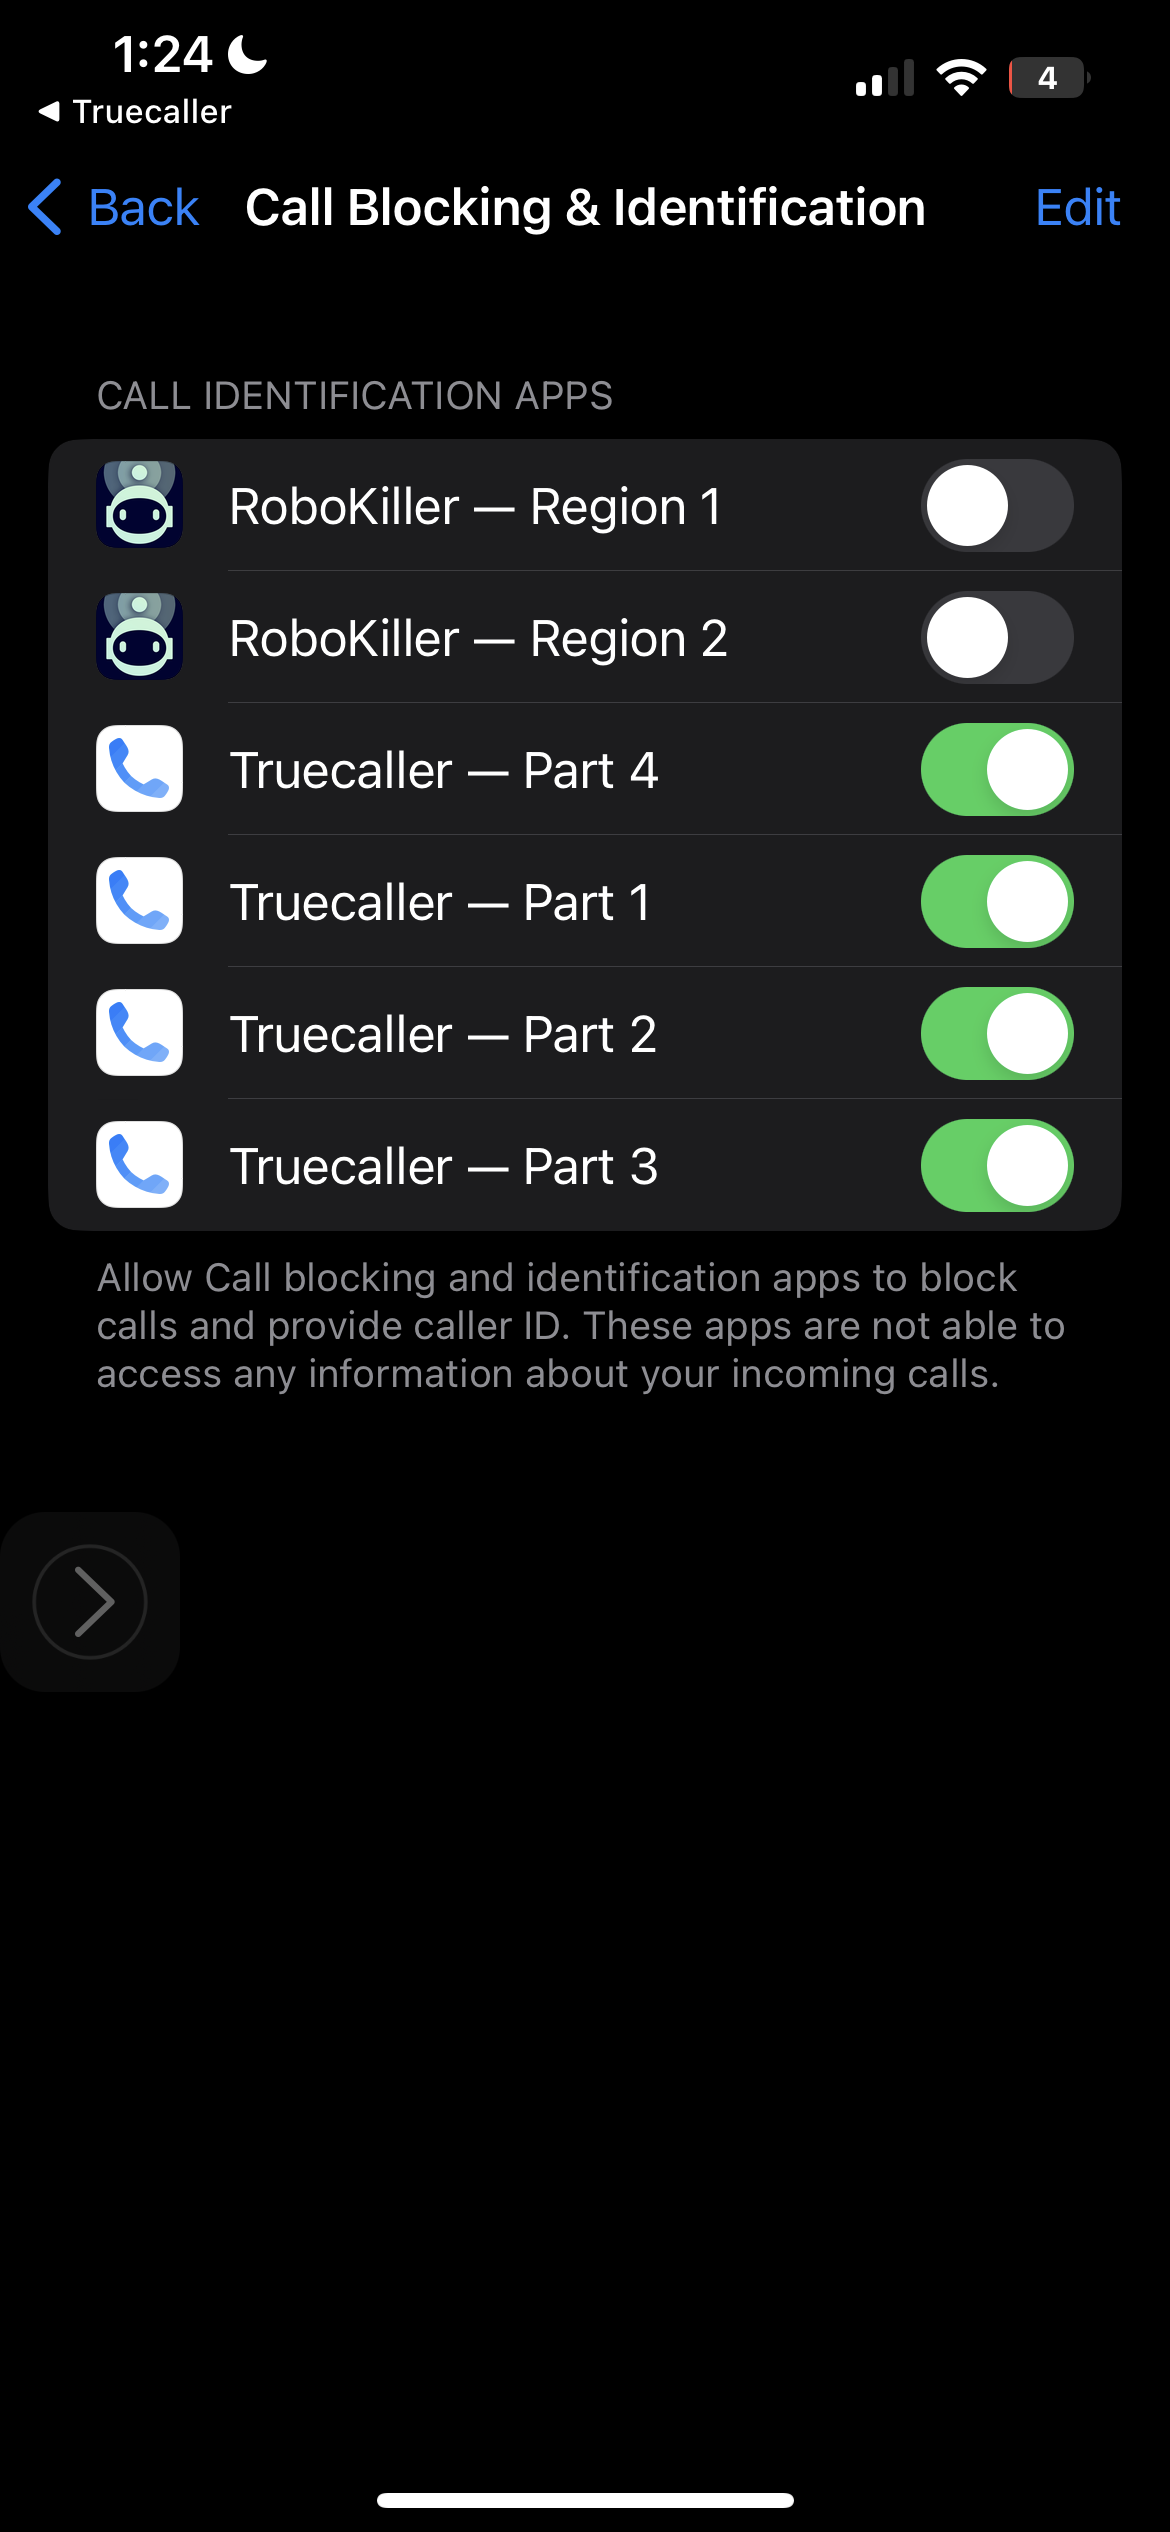 Call blocking and recognition